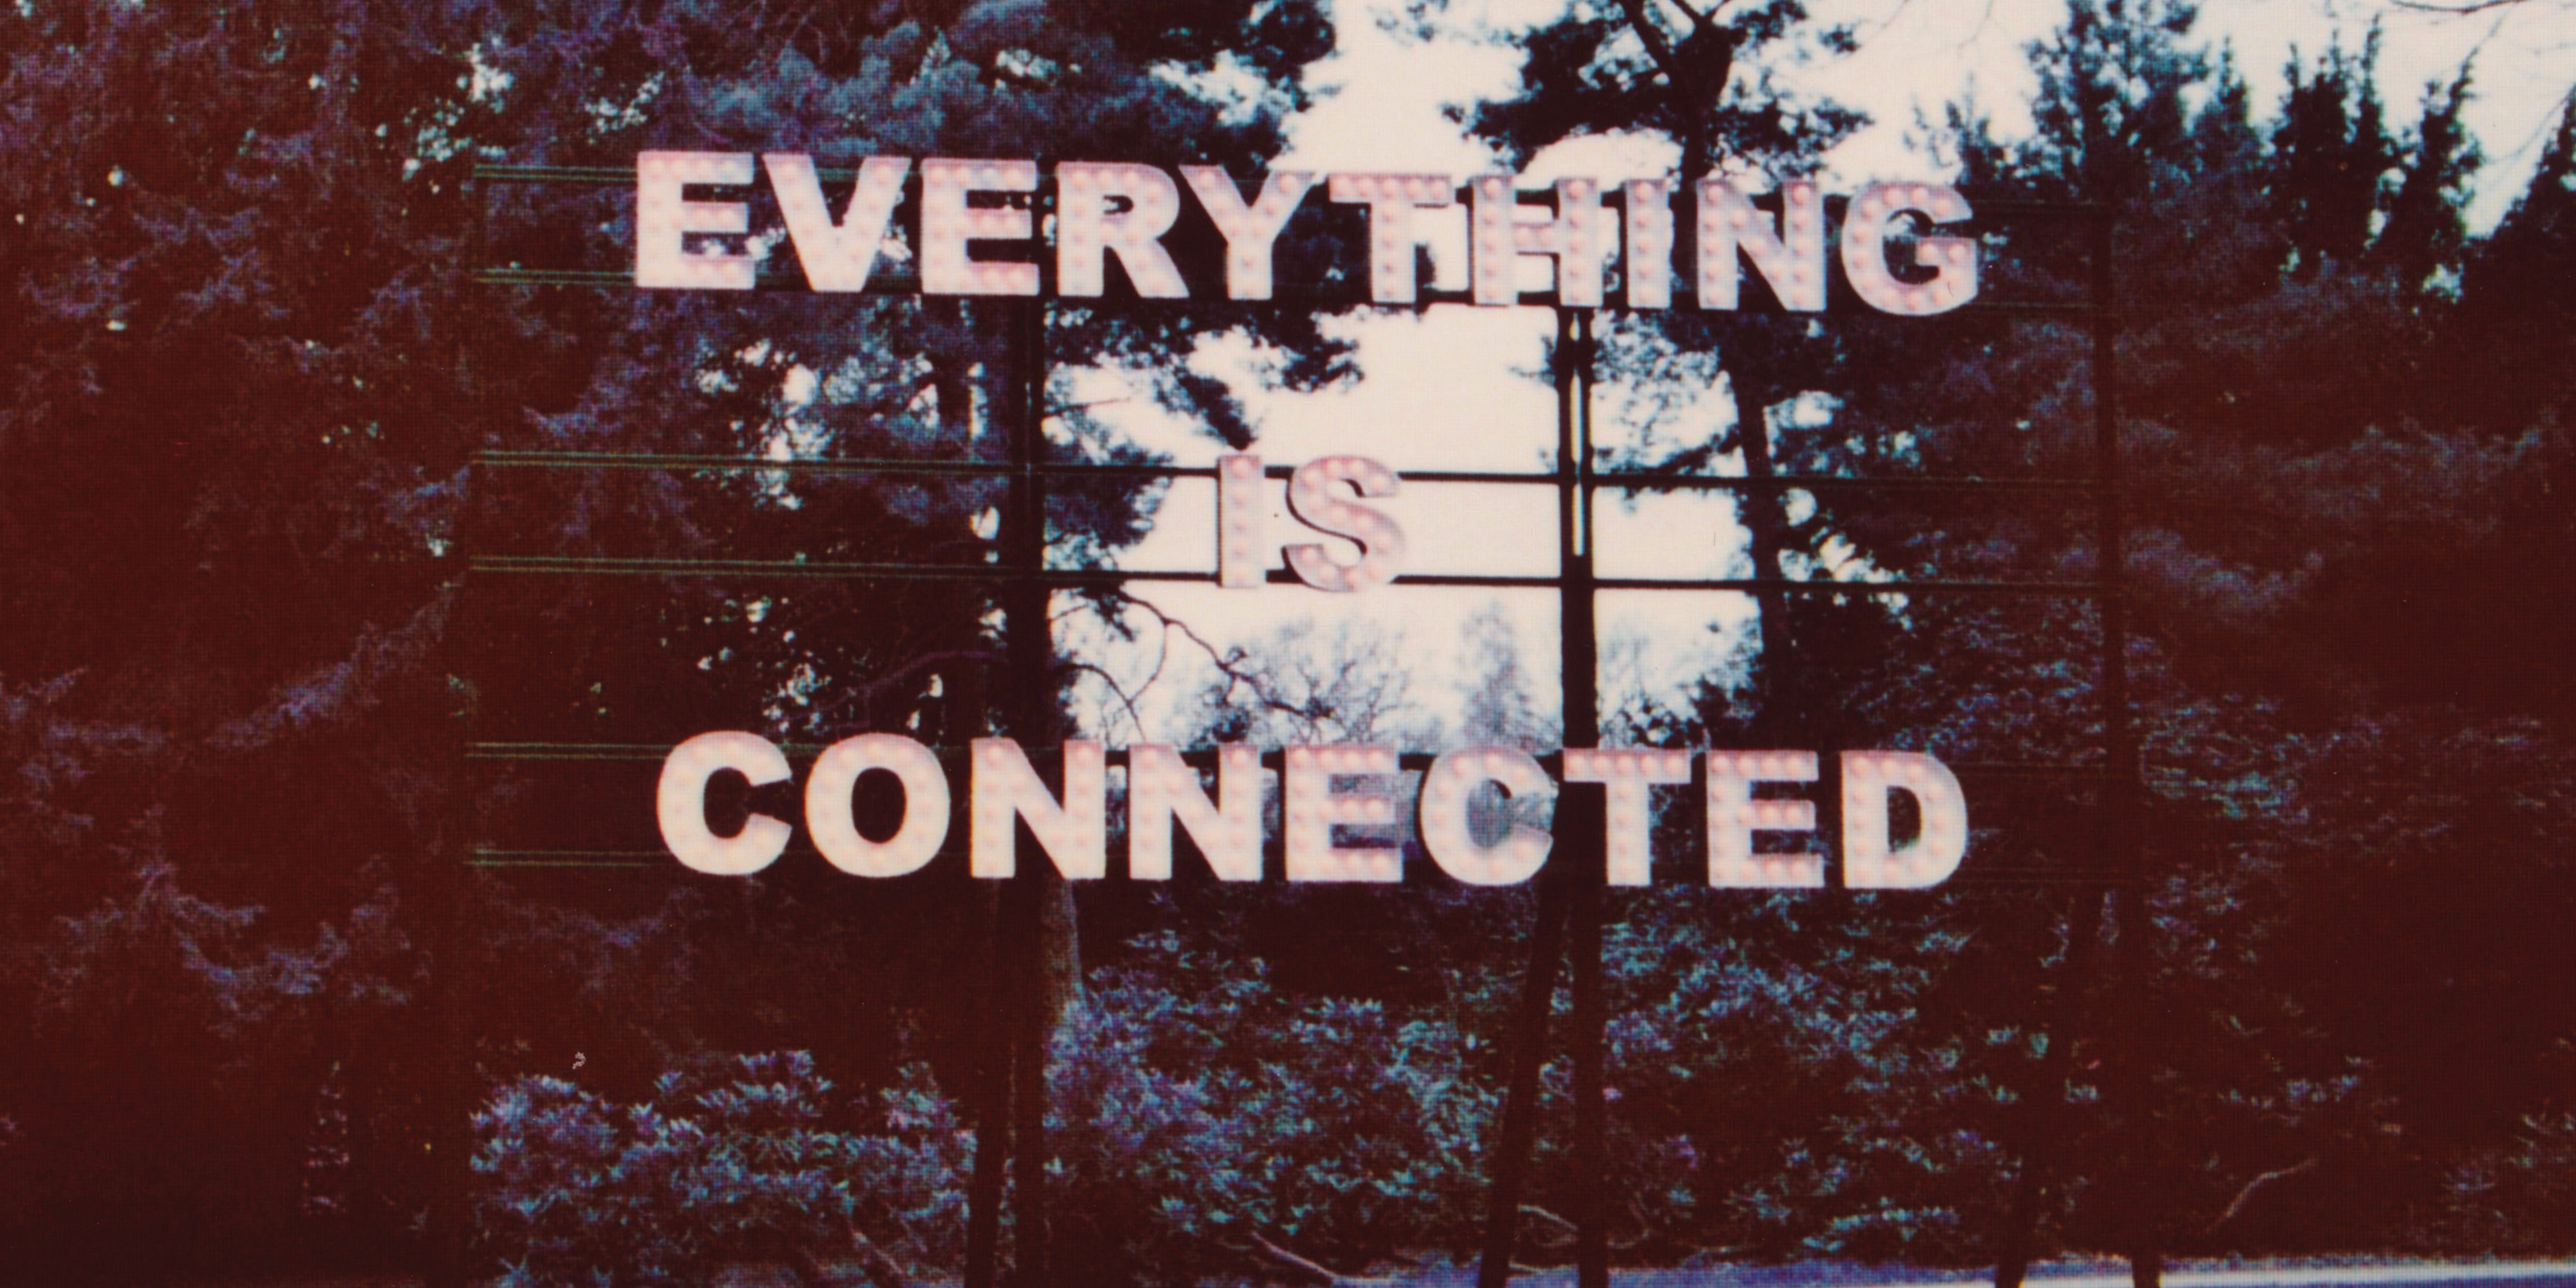 Everything is Connected